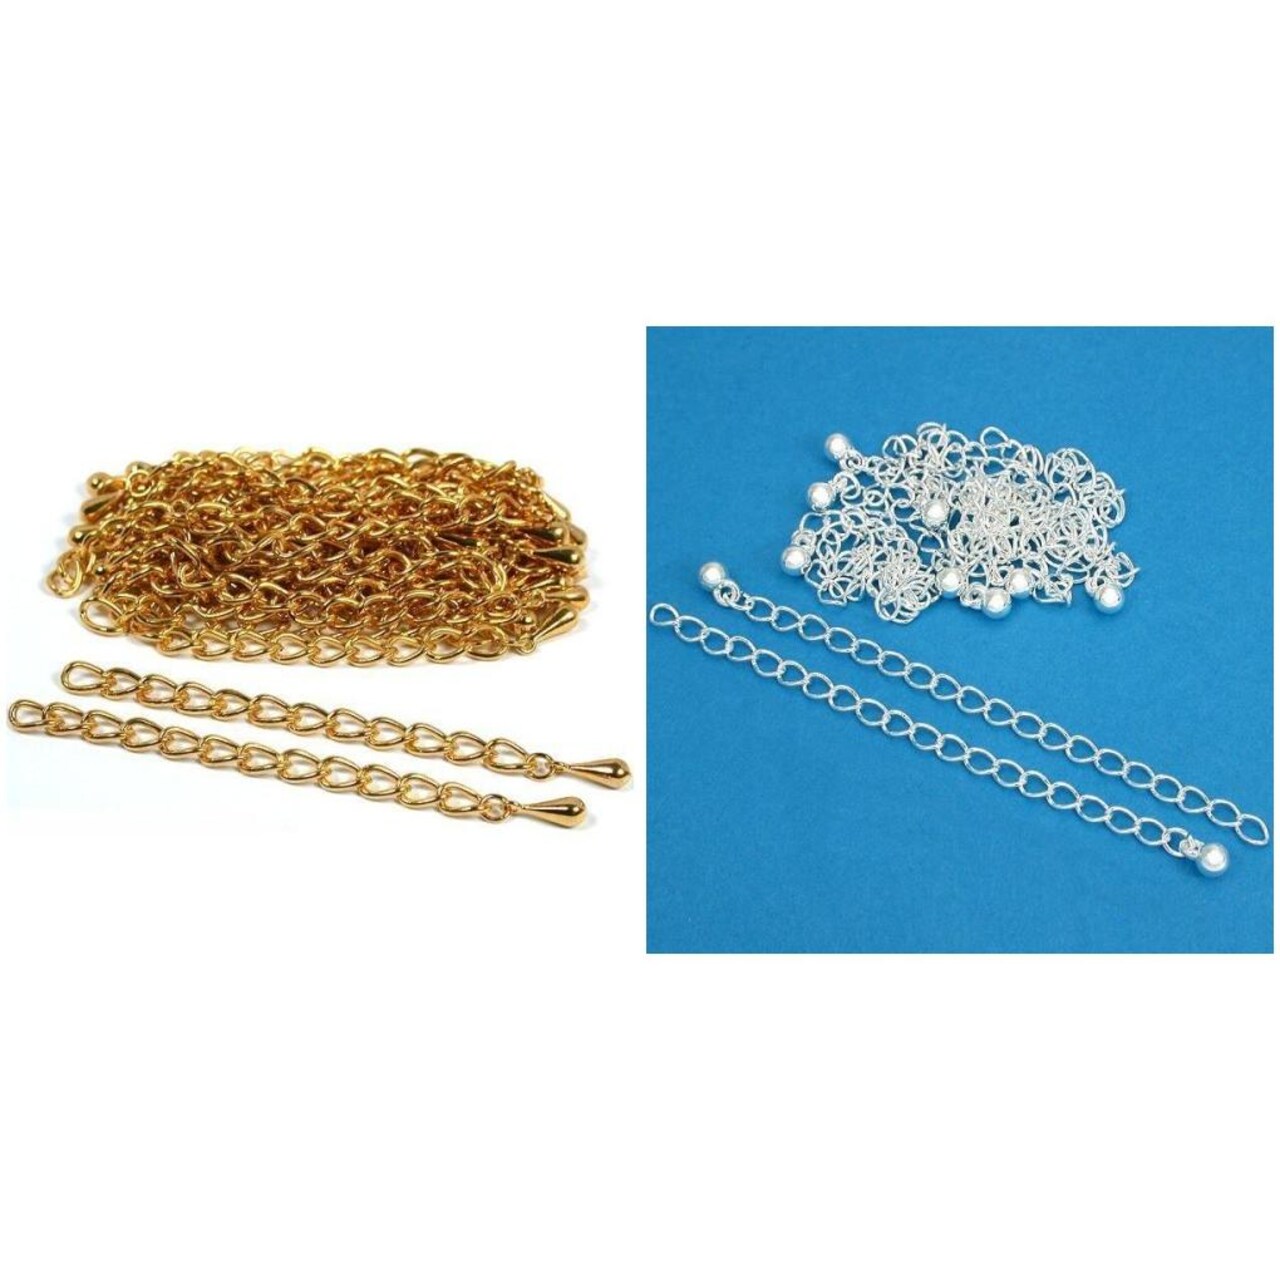 Gold & Silver Plated Necklace Chain Extenders Jewelry Repair Findings Kit  40 Pcs